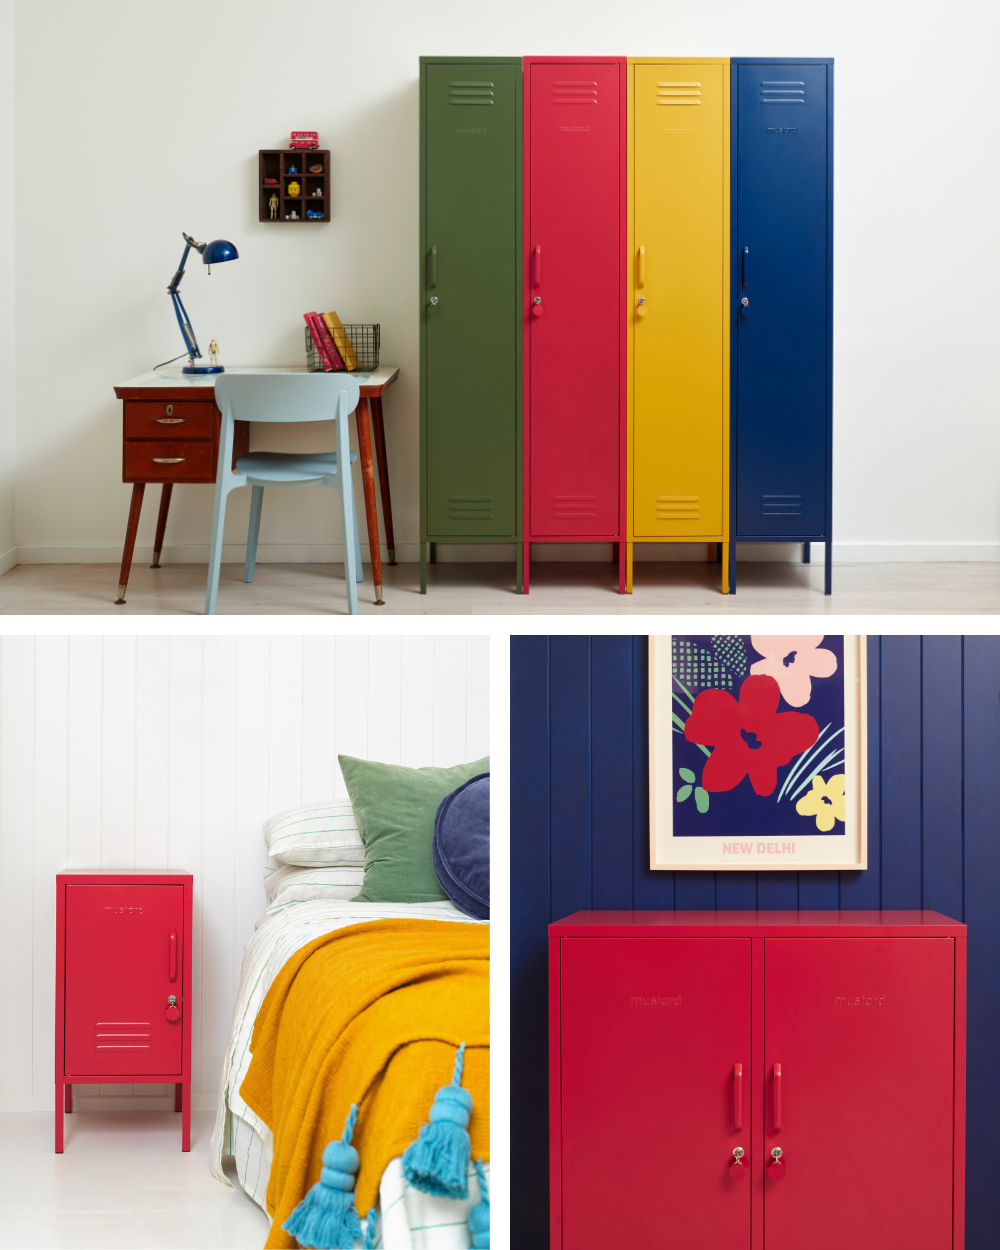 A collage of images shows Poppy red lockers styled with primary colours in a bold, retro style.